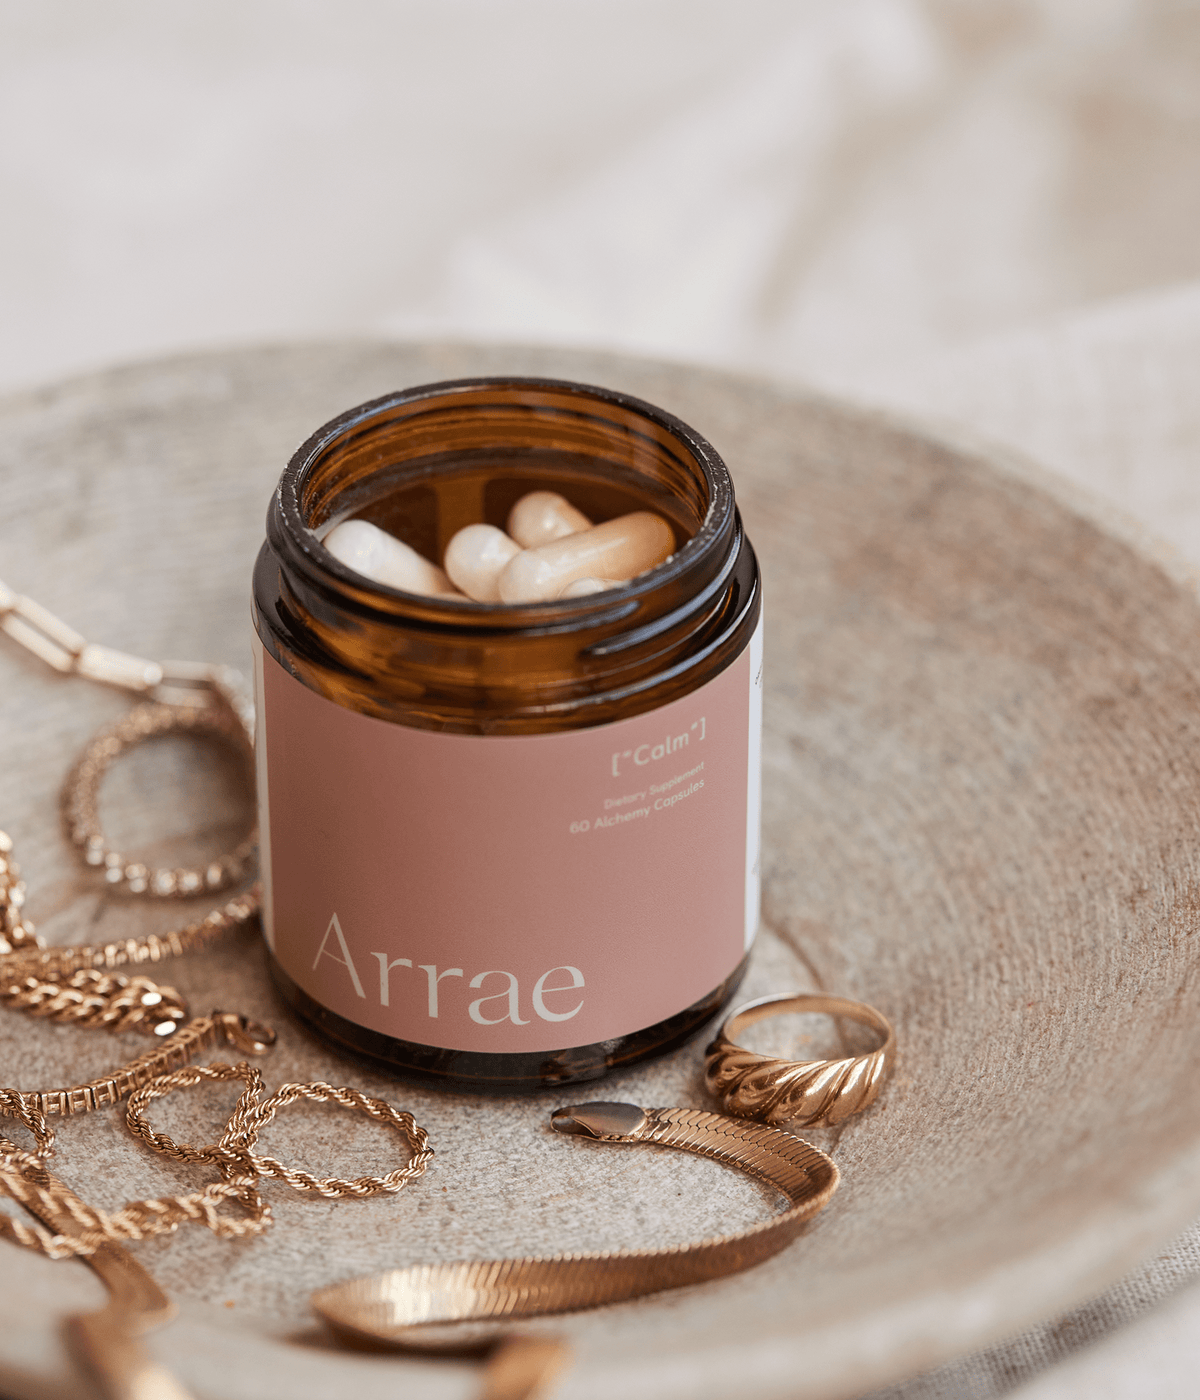 Arrae Calm Supplement surrounded by jewellery - A bottle of 60 capsules featuring a blend of natural ingredients, formulated to promote relaxation and reduce stress and anxiety